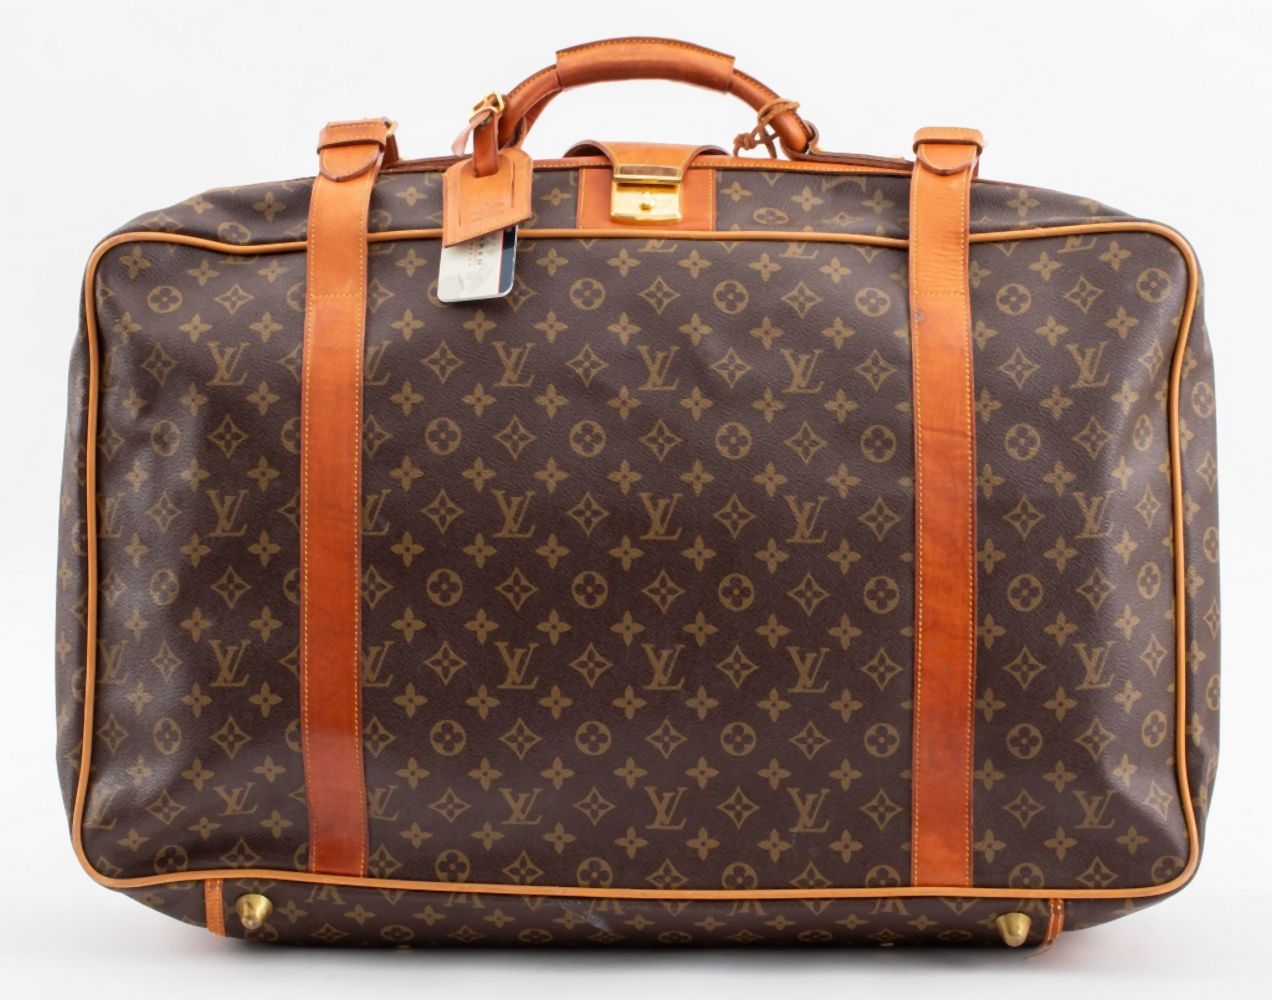 LOUIS VUITTON SOFT SIDE LUGGAGE 2bbbbd